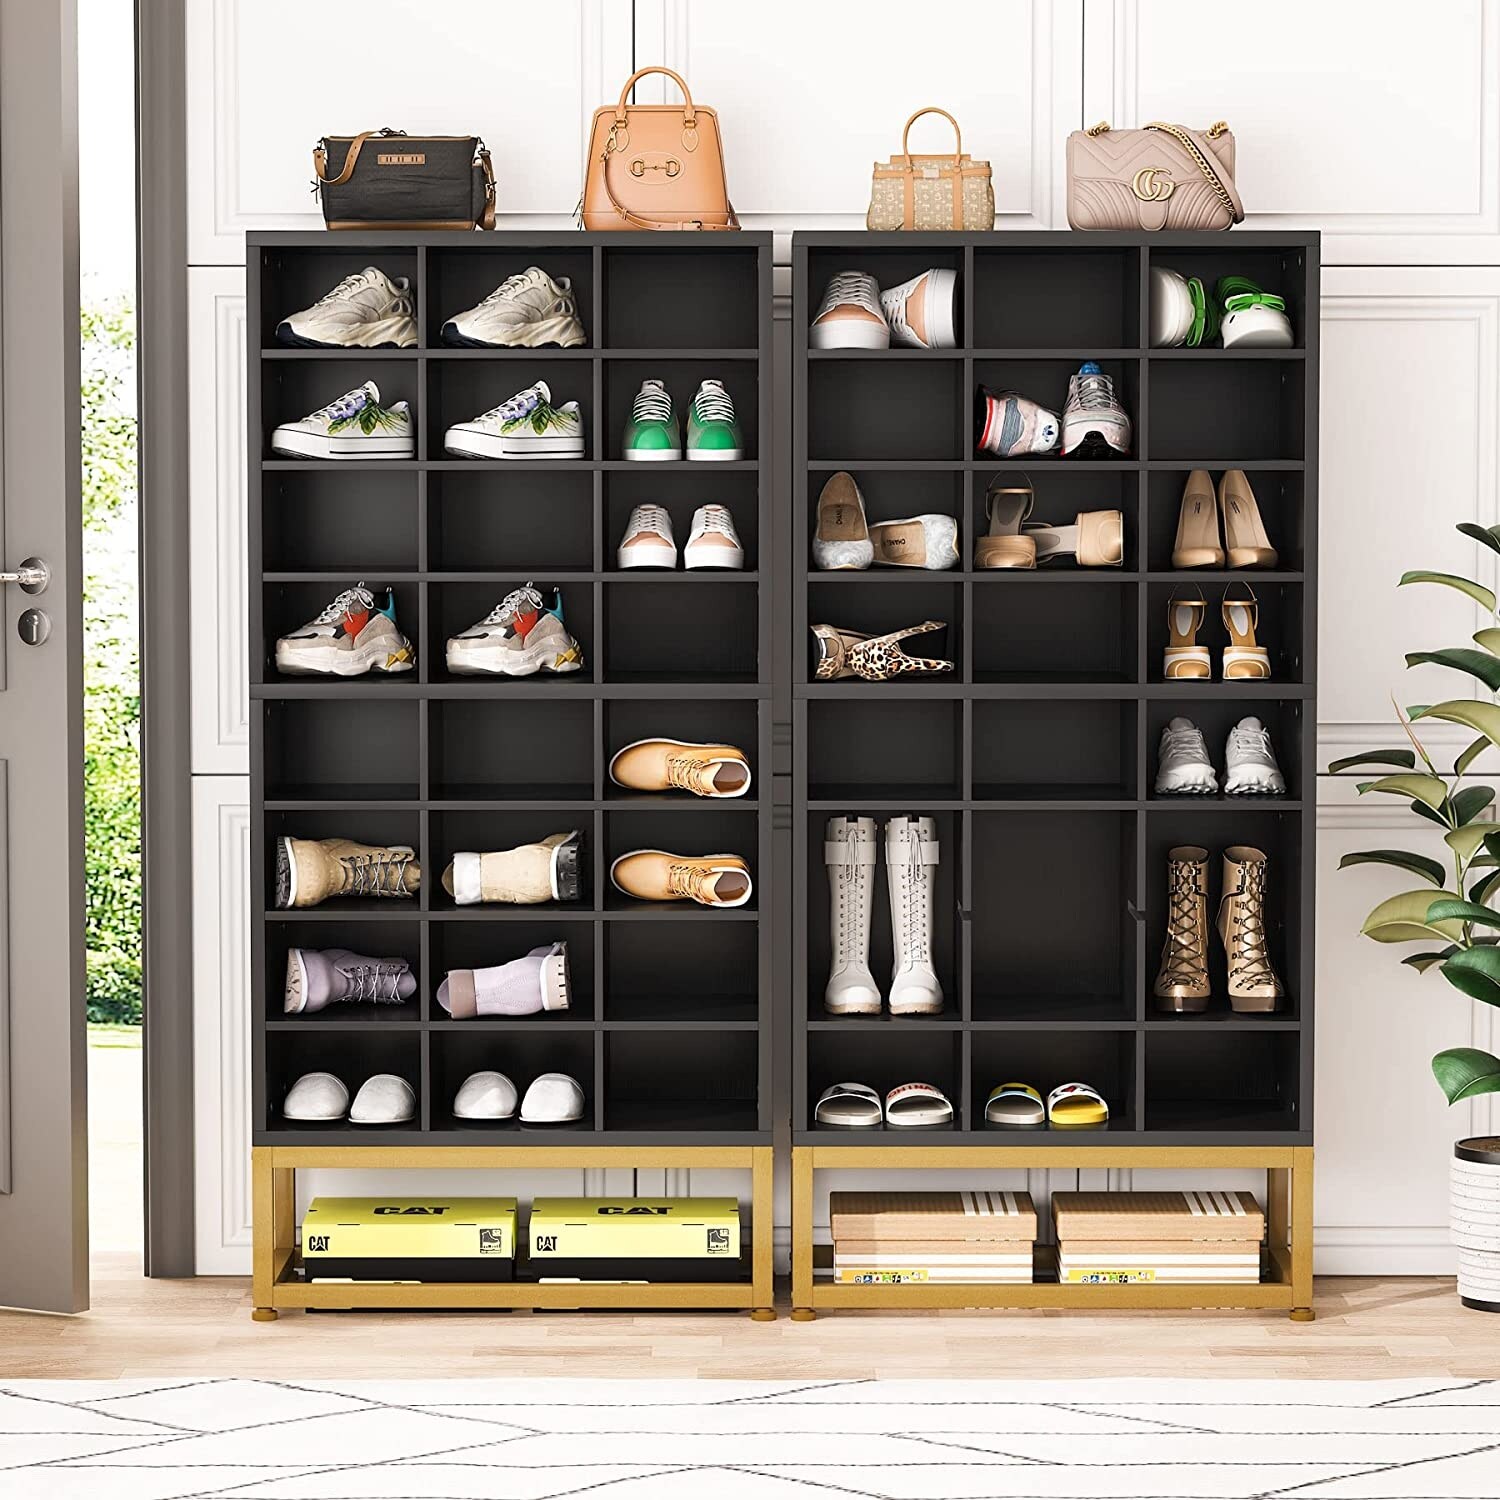 https://ak1.ostkcdn.com/images/products/is/images/direct/df730358642510a48ae73e853b7e57a9c84f0e54/Tall-Shoe-Storage%2C-24-Cubby-Cabinet%2C-White.jpg